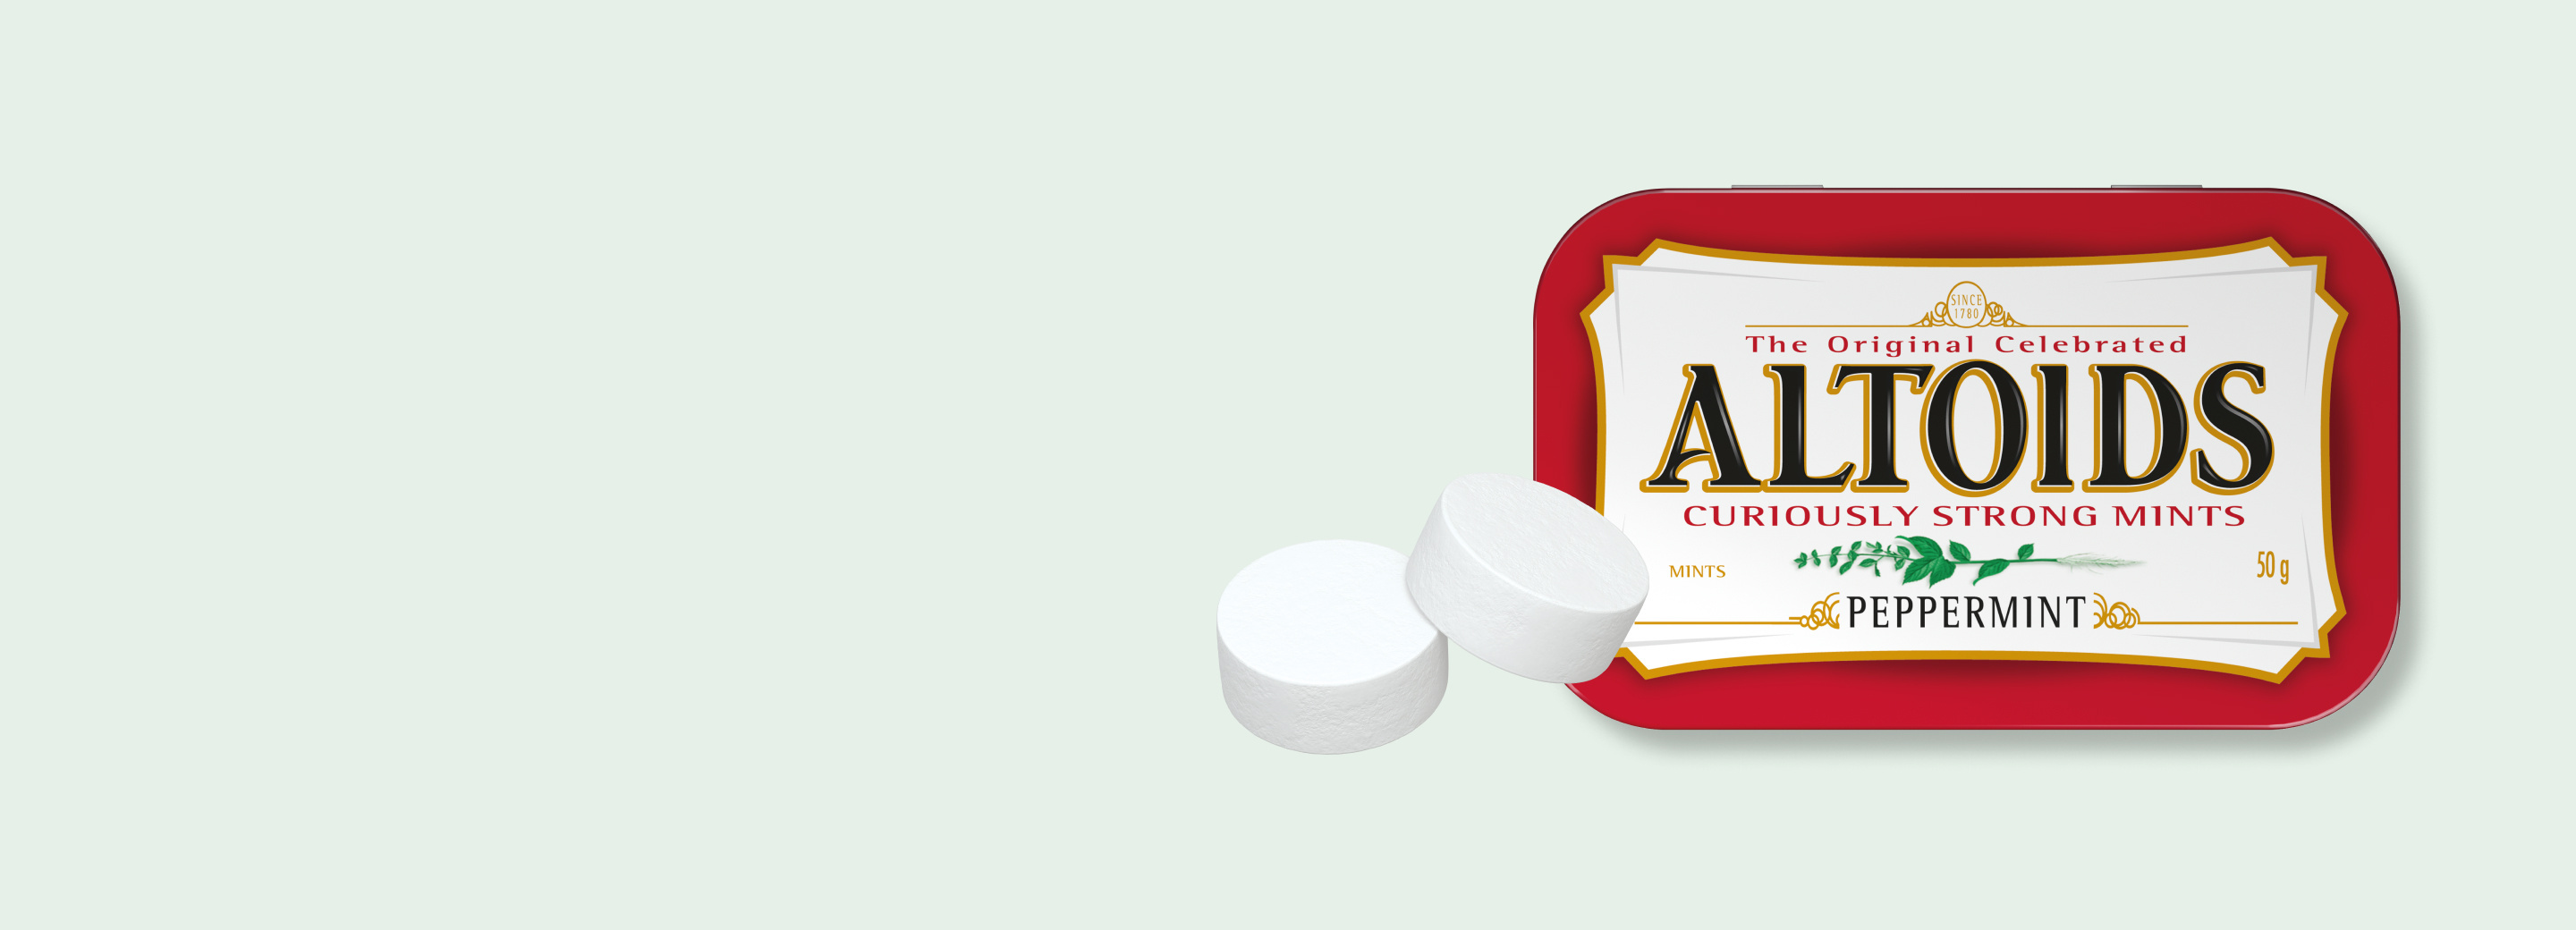 Tin of Peppermint Altoids and two Altoids mints on a white background